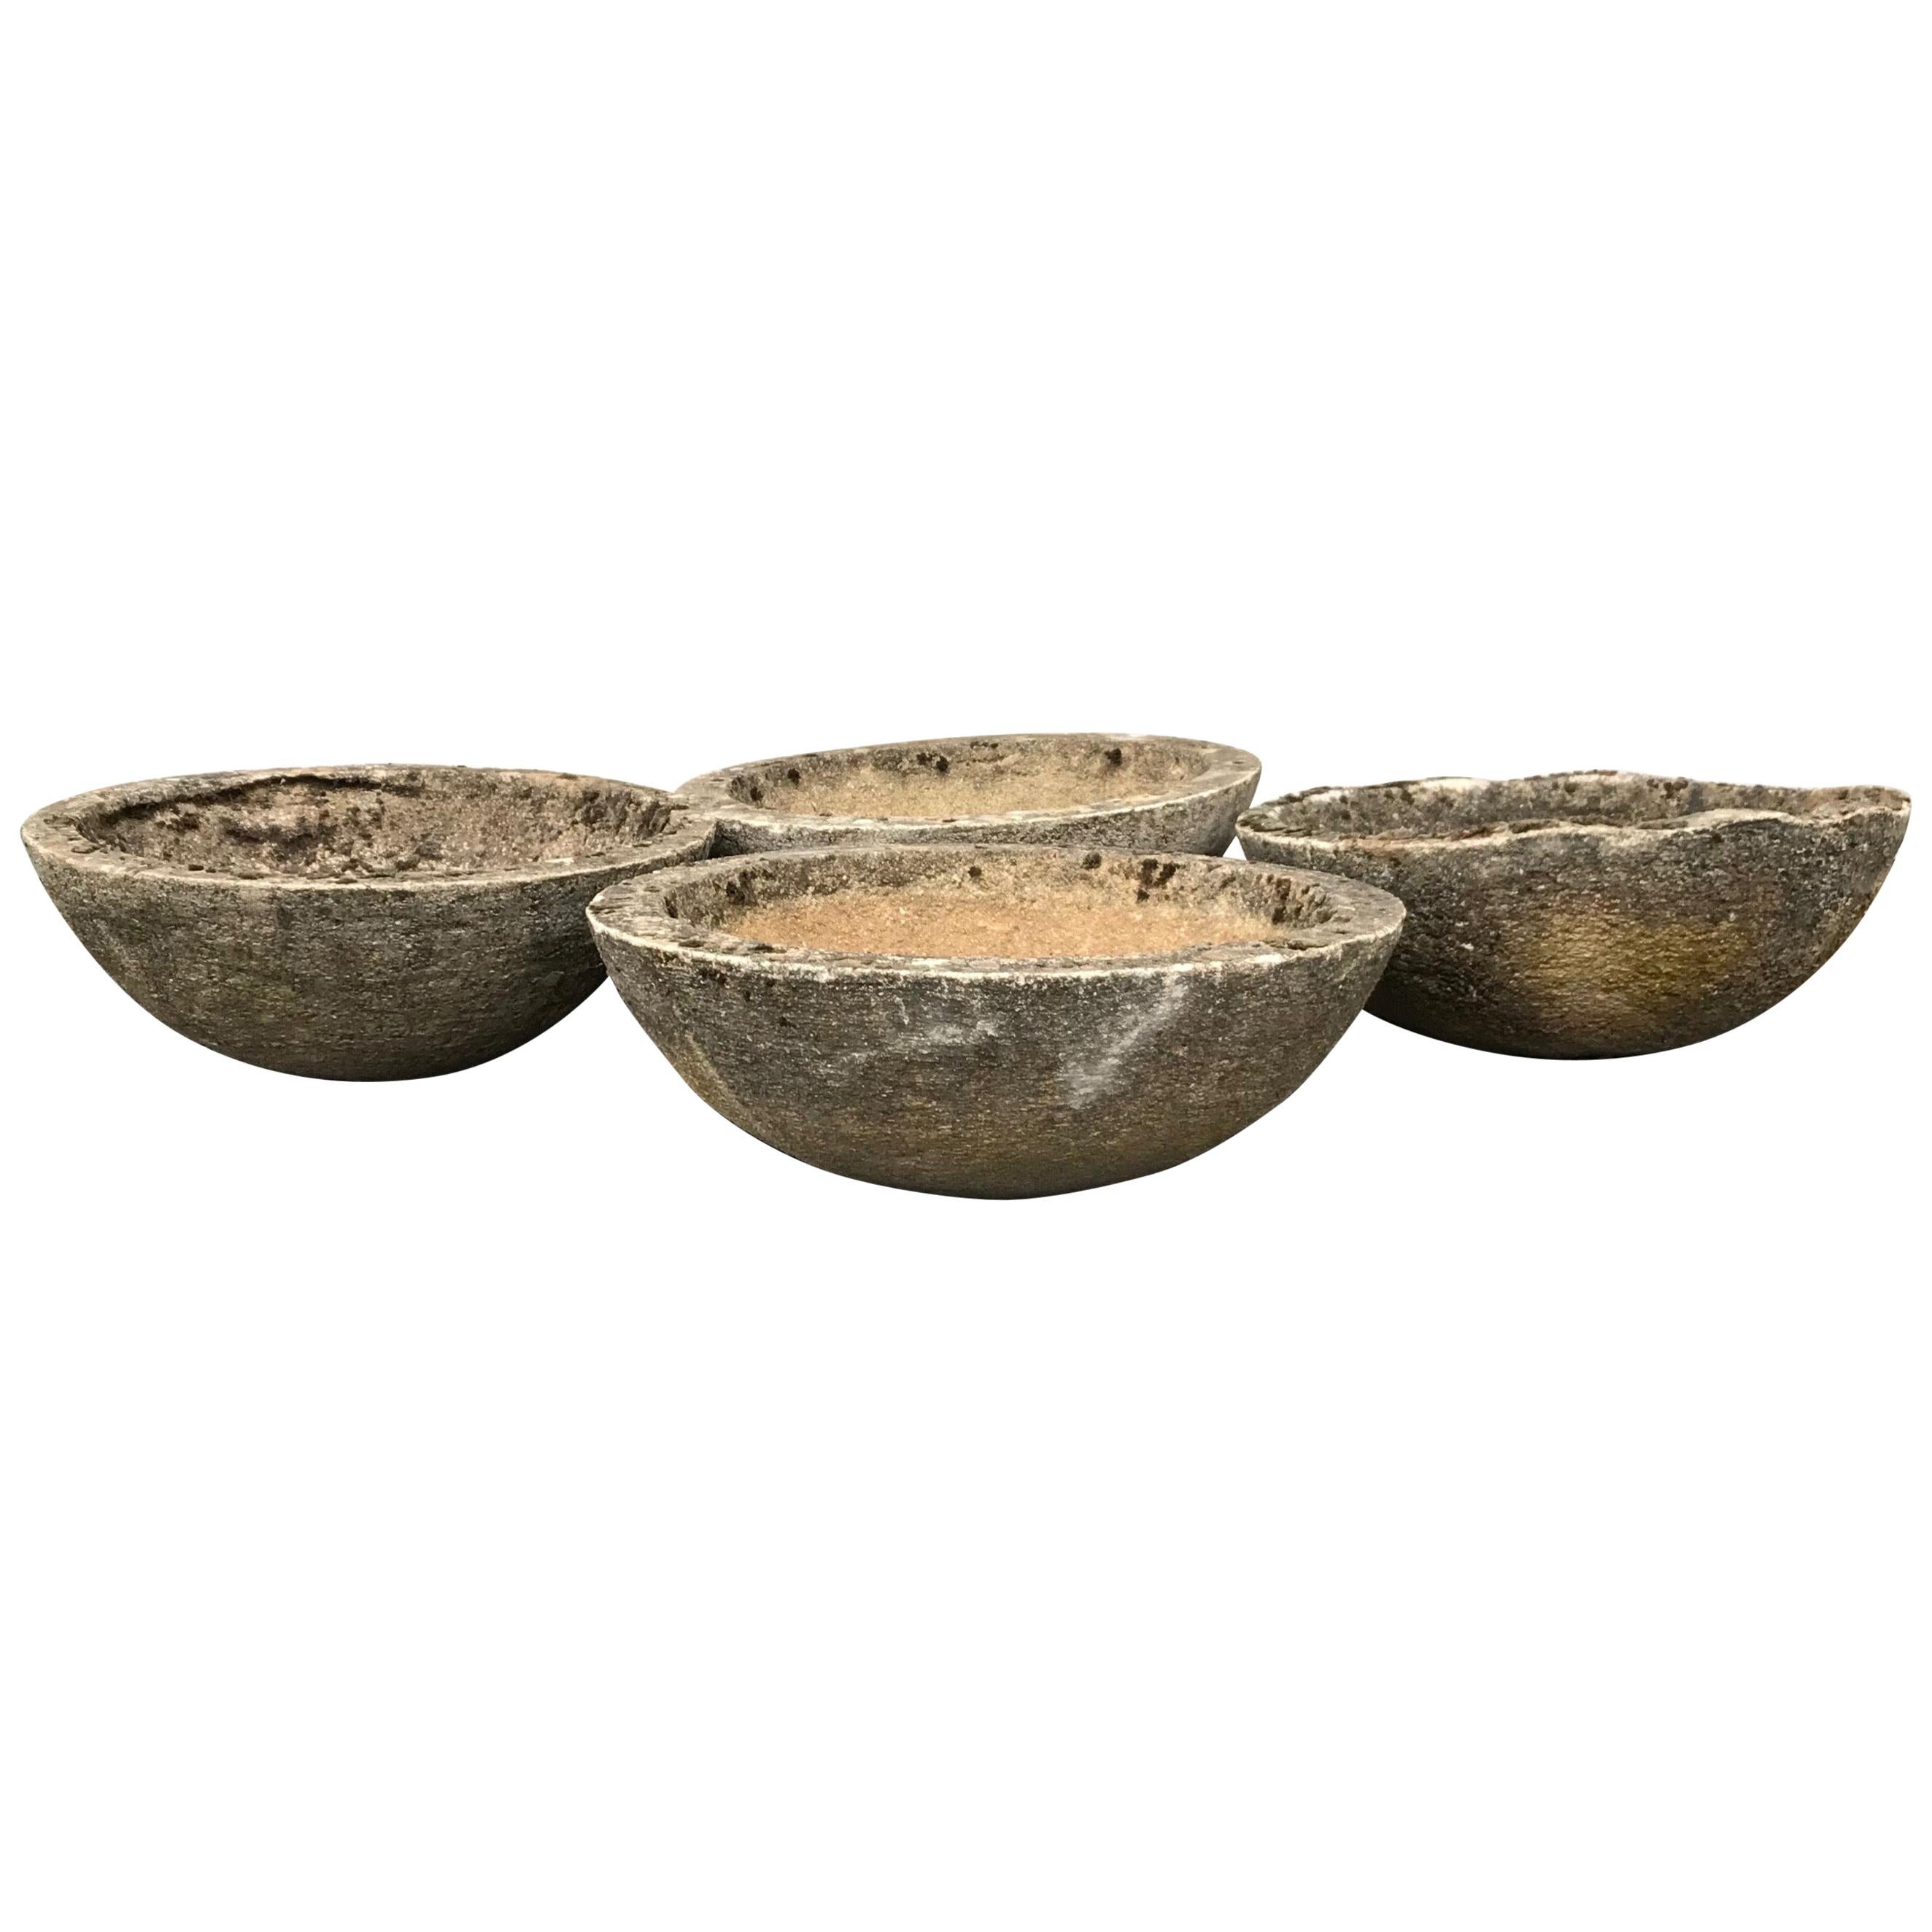 Set of Four French Mossy and Weathered Midcentury Cast Stone Bowl Planters